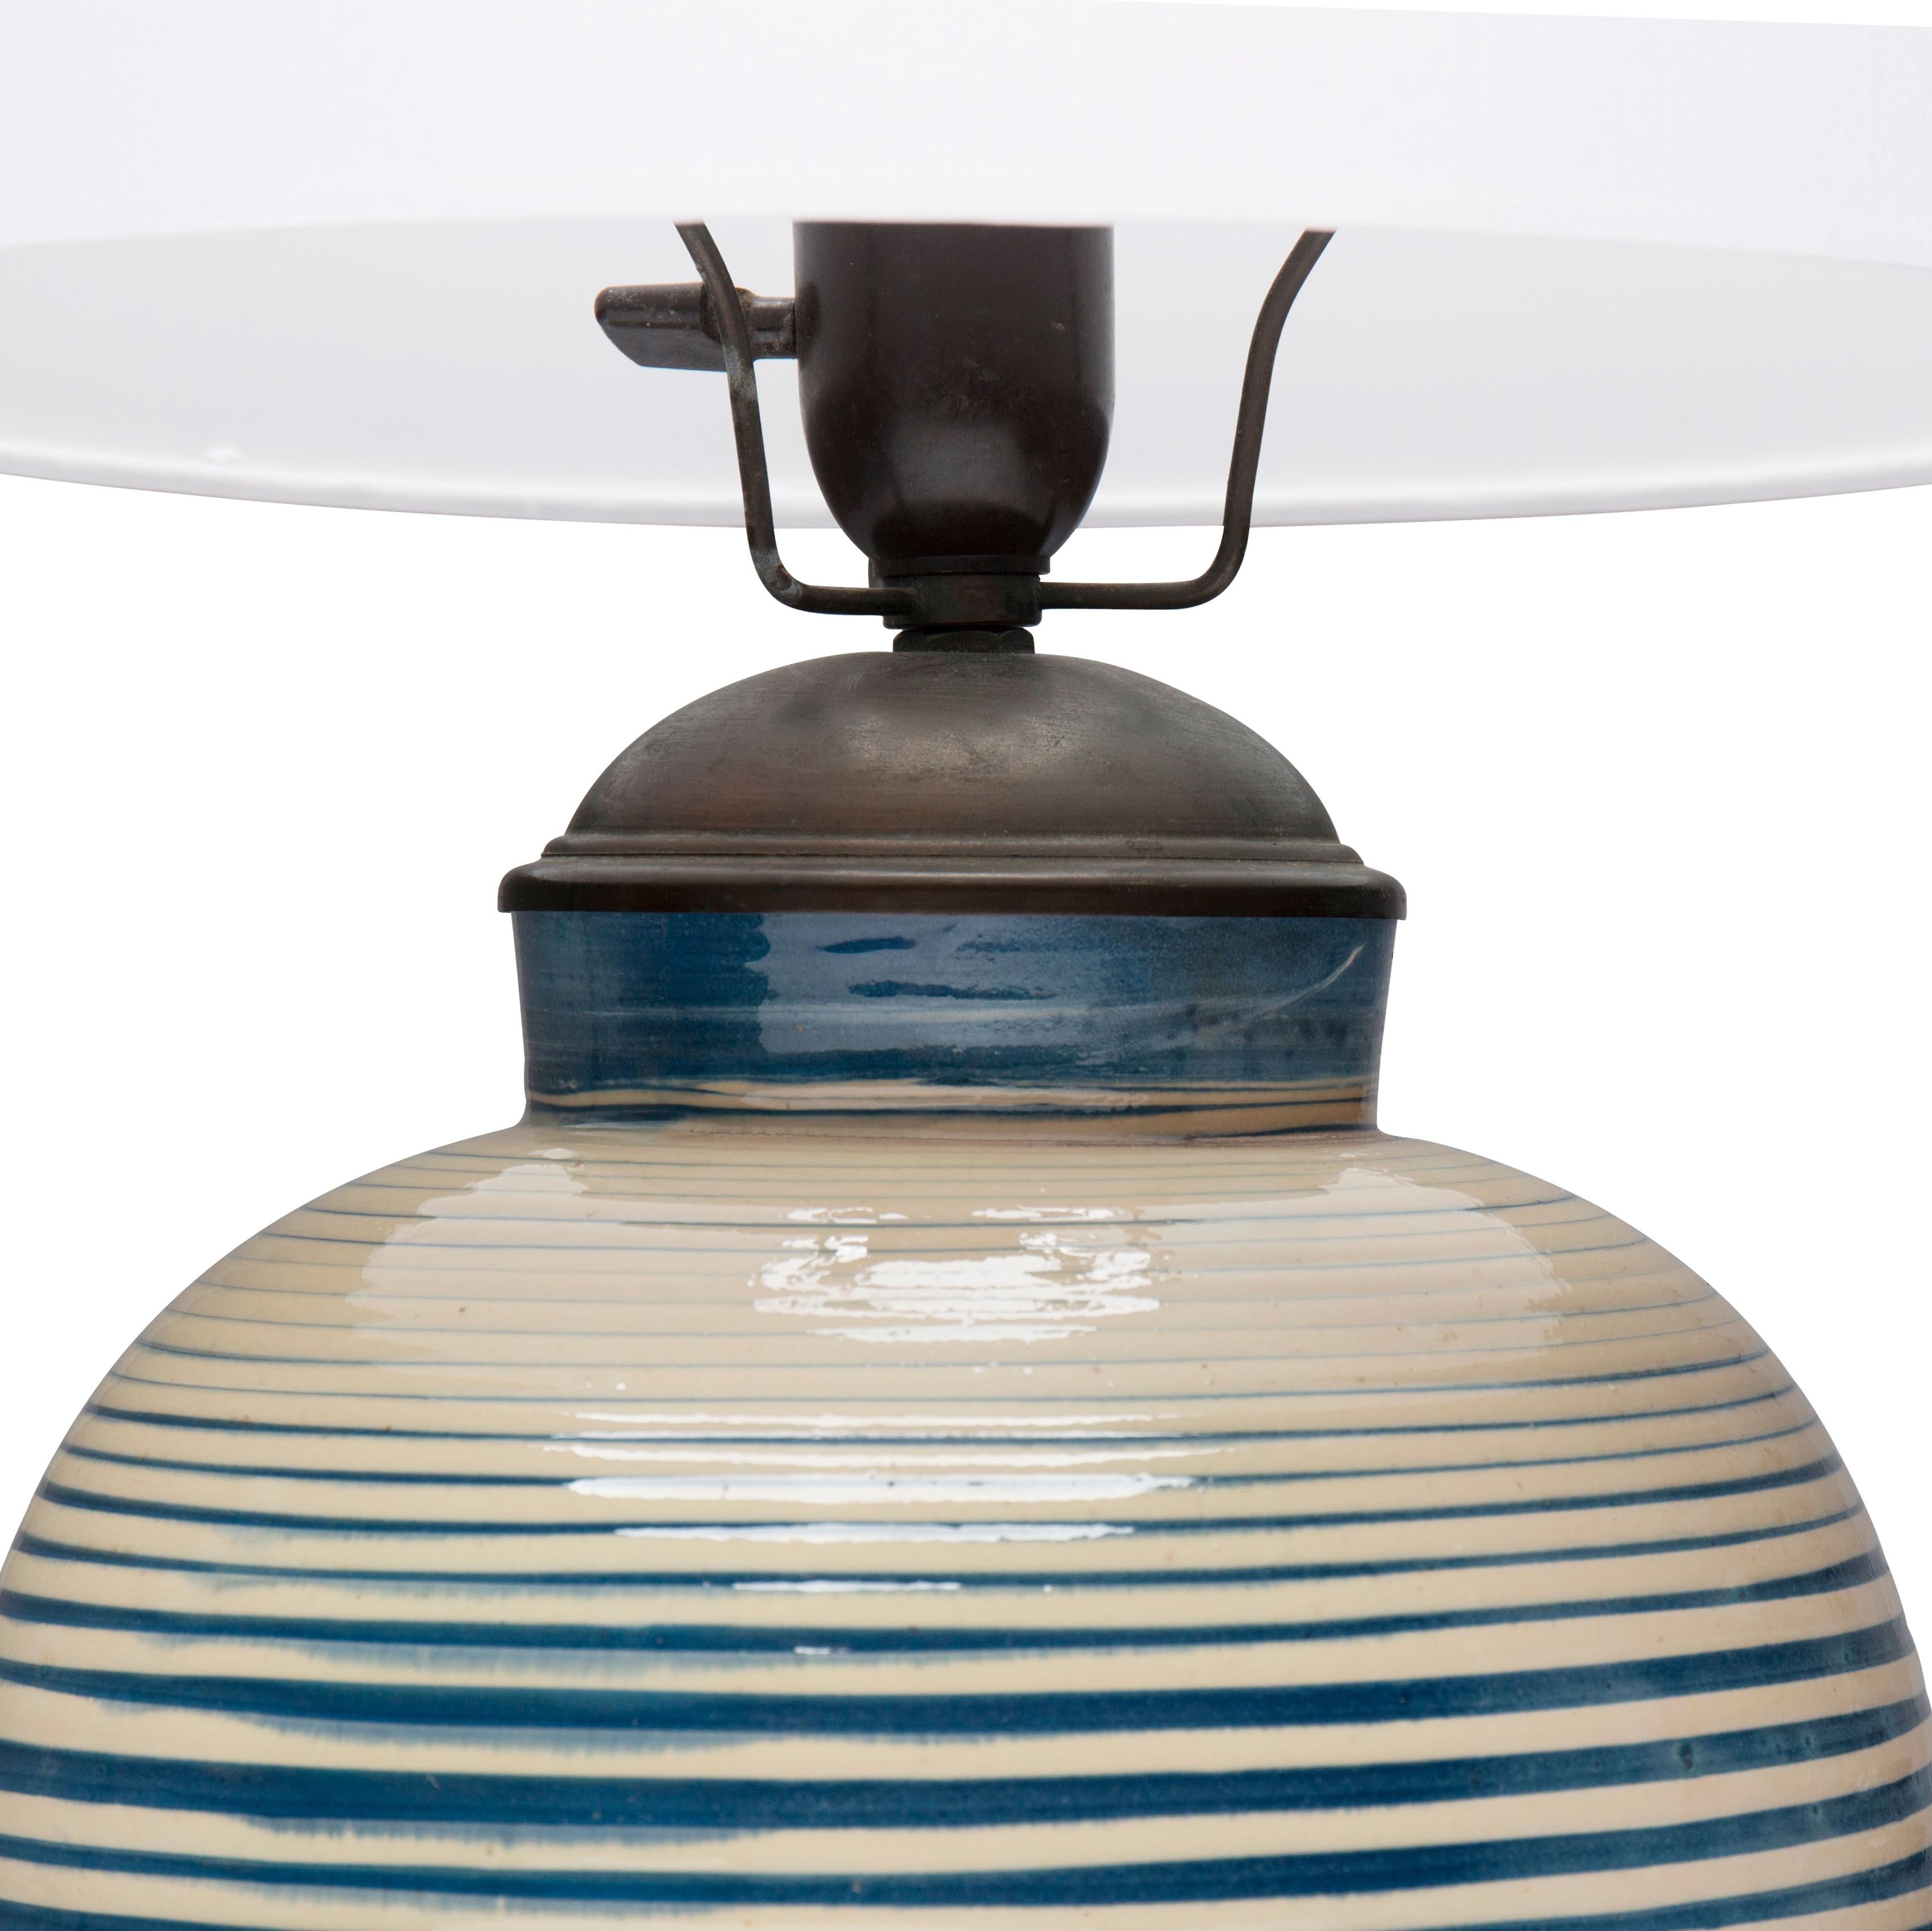 This large table lamp has horizontal blue stripes on a creamy background.

The lamp was executed by Herman A. Kähler, Denmark, ca. in the 1940s.

It has the ‘HAK’ monogram incised.
